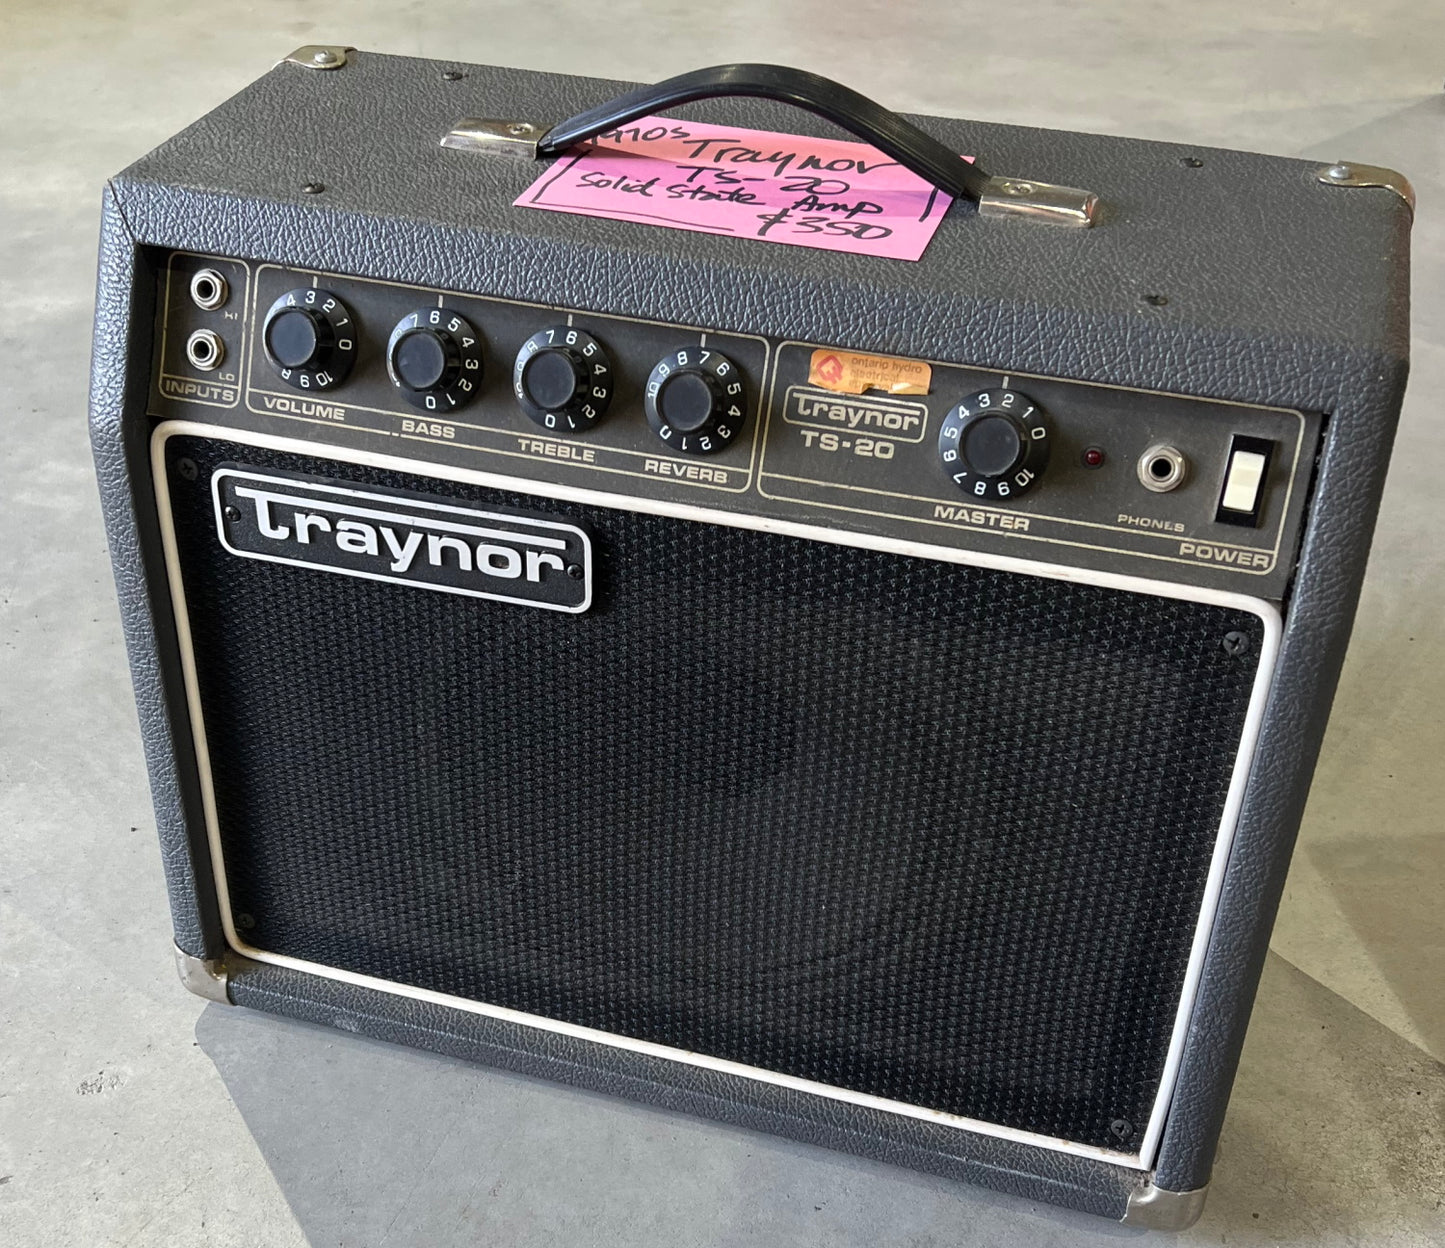 Traynor TS-20 Solid State Guitar Amplifier